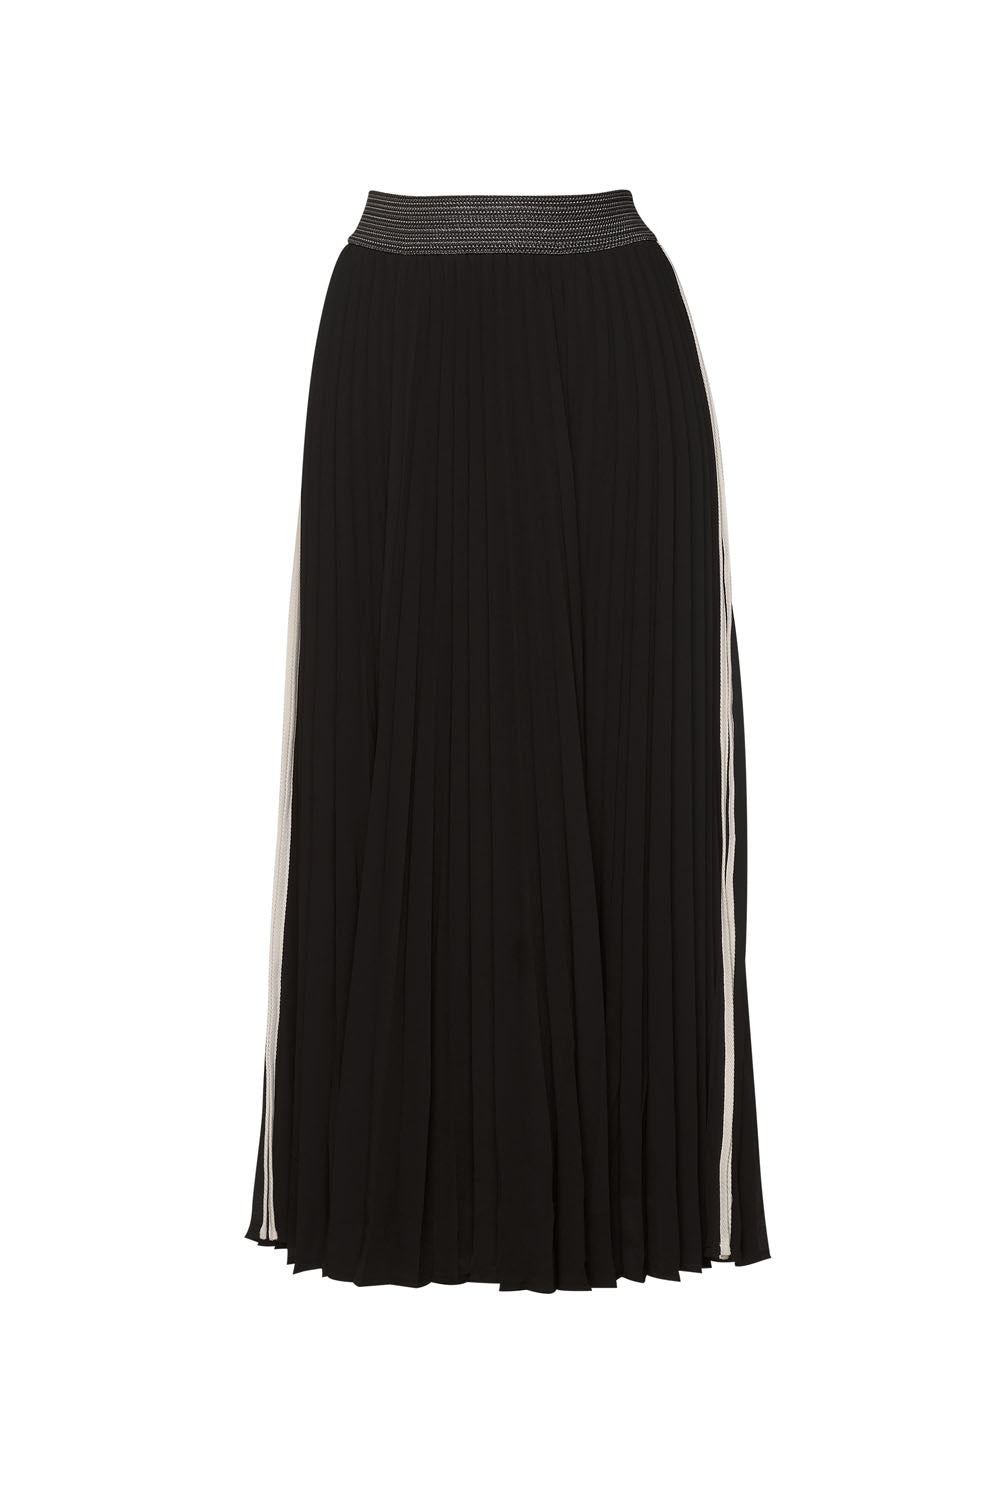 MADLY SWEETLY JUST PLEAT IT SKIRT - BLACK - THE VOGUE STORE